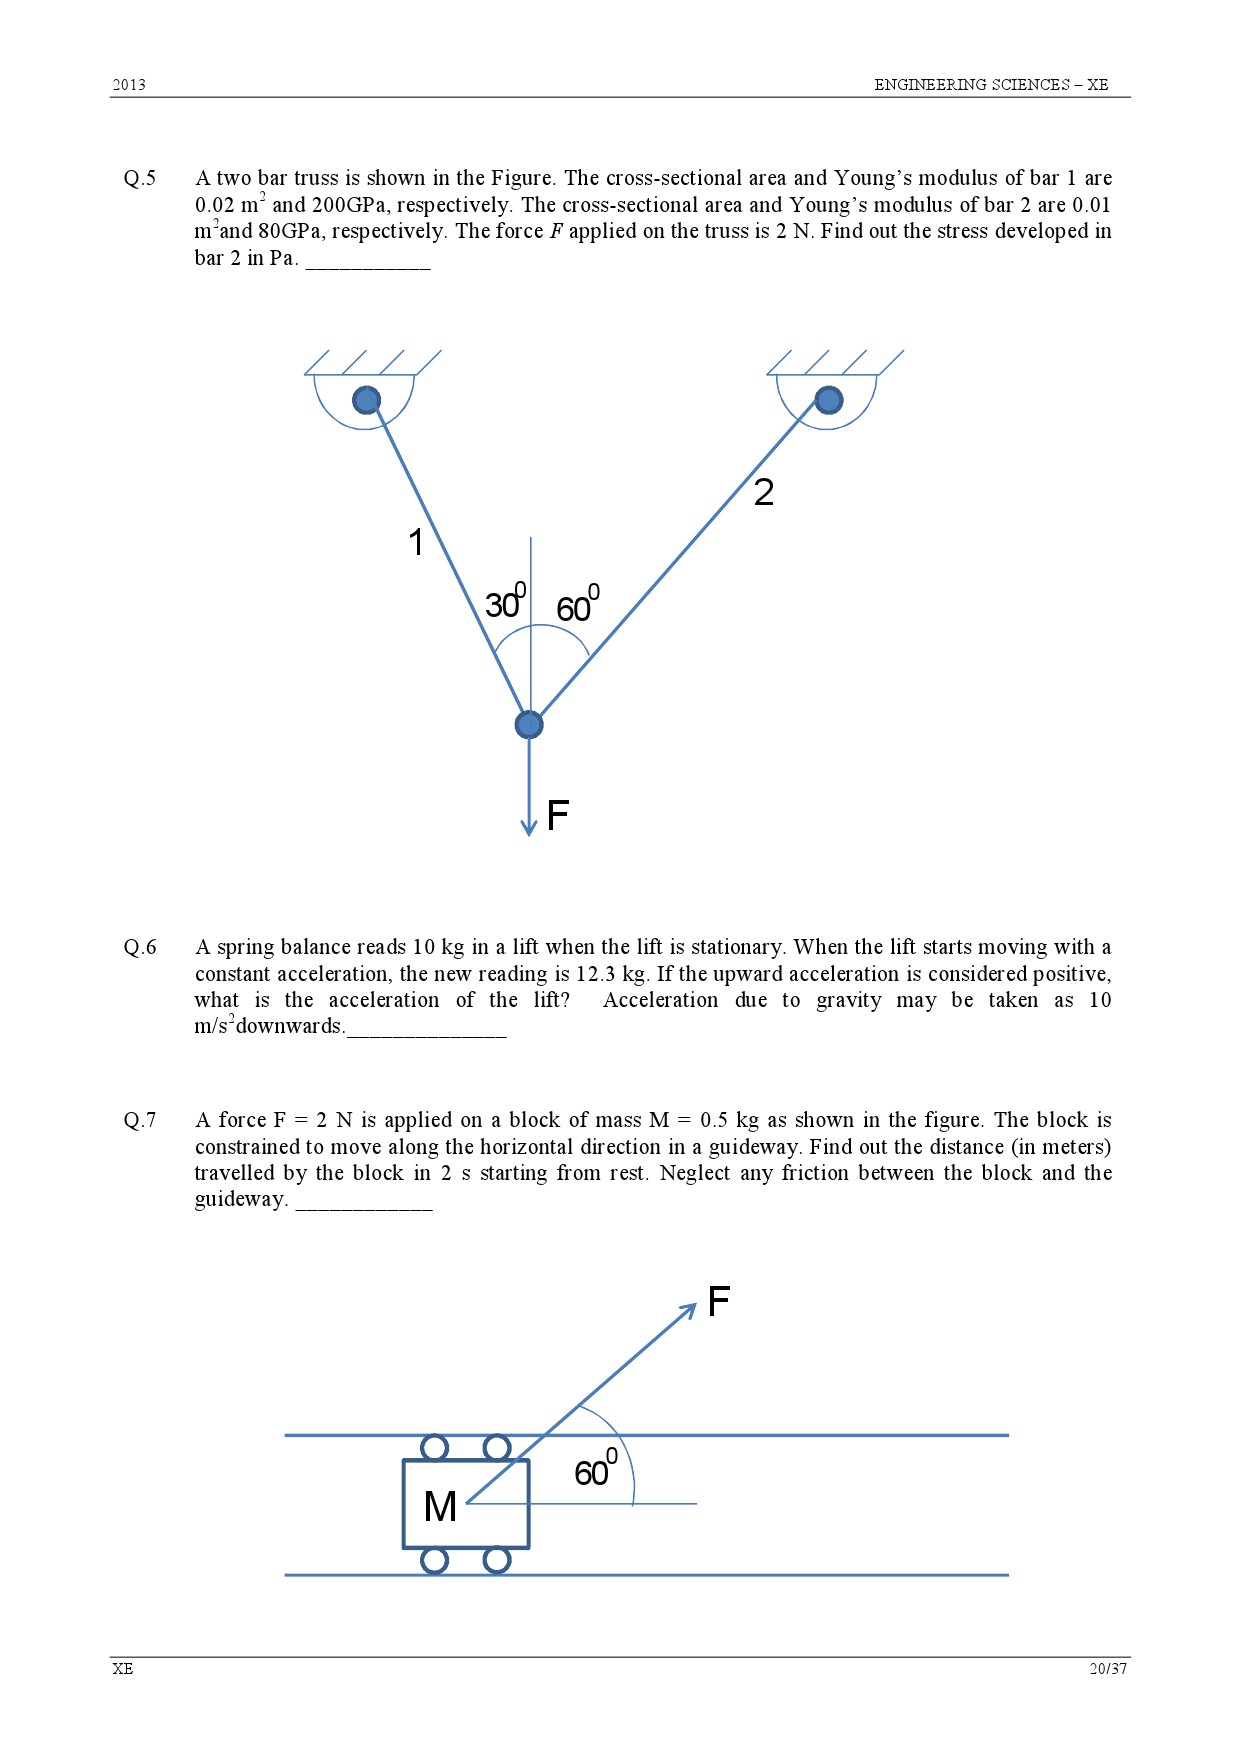 GATE Exam Question Paper 2013 Engineering Sciences 20